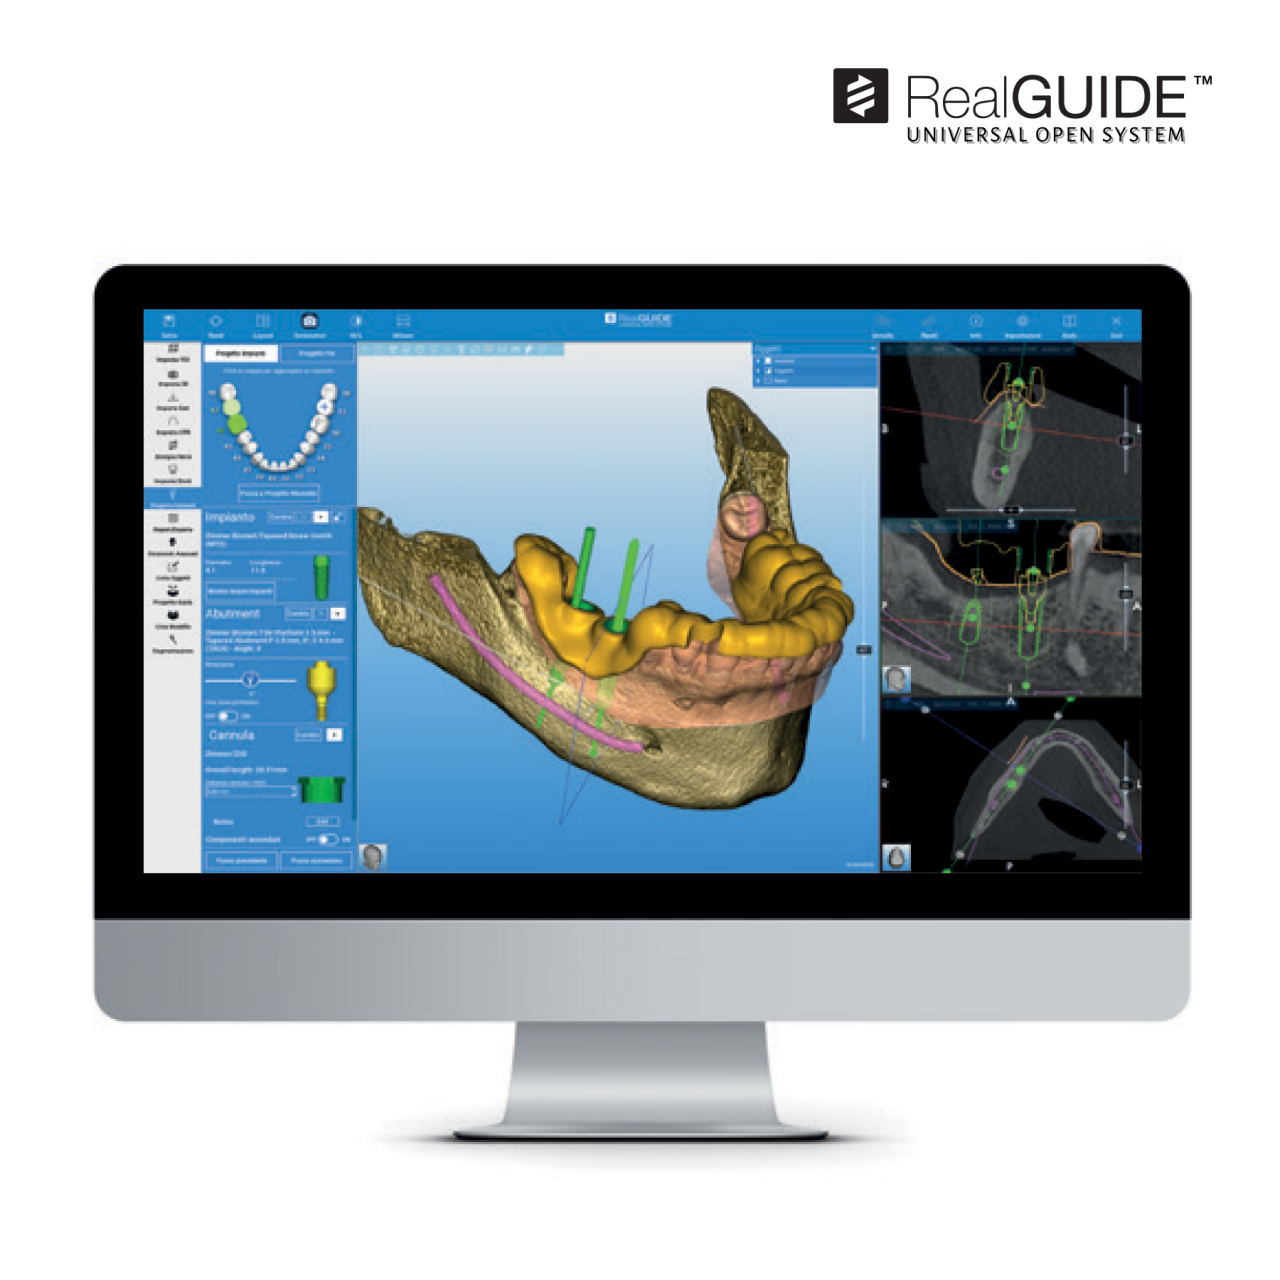 Computer Monitor Displaying ZimVie Dental Guided Implant Surgery Encode RealGuide Software